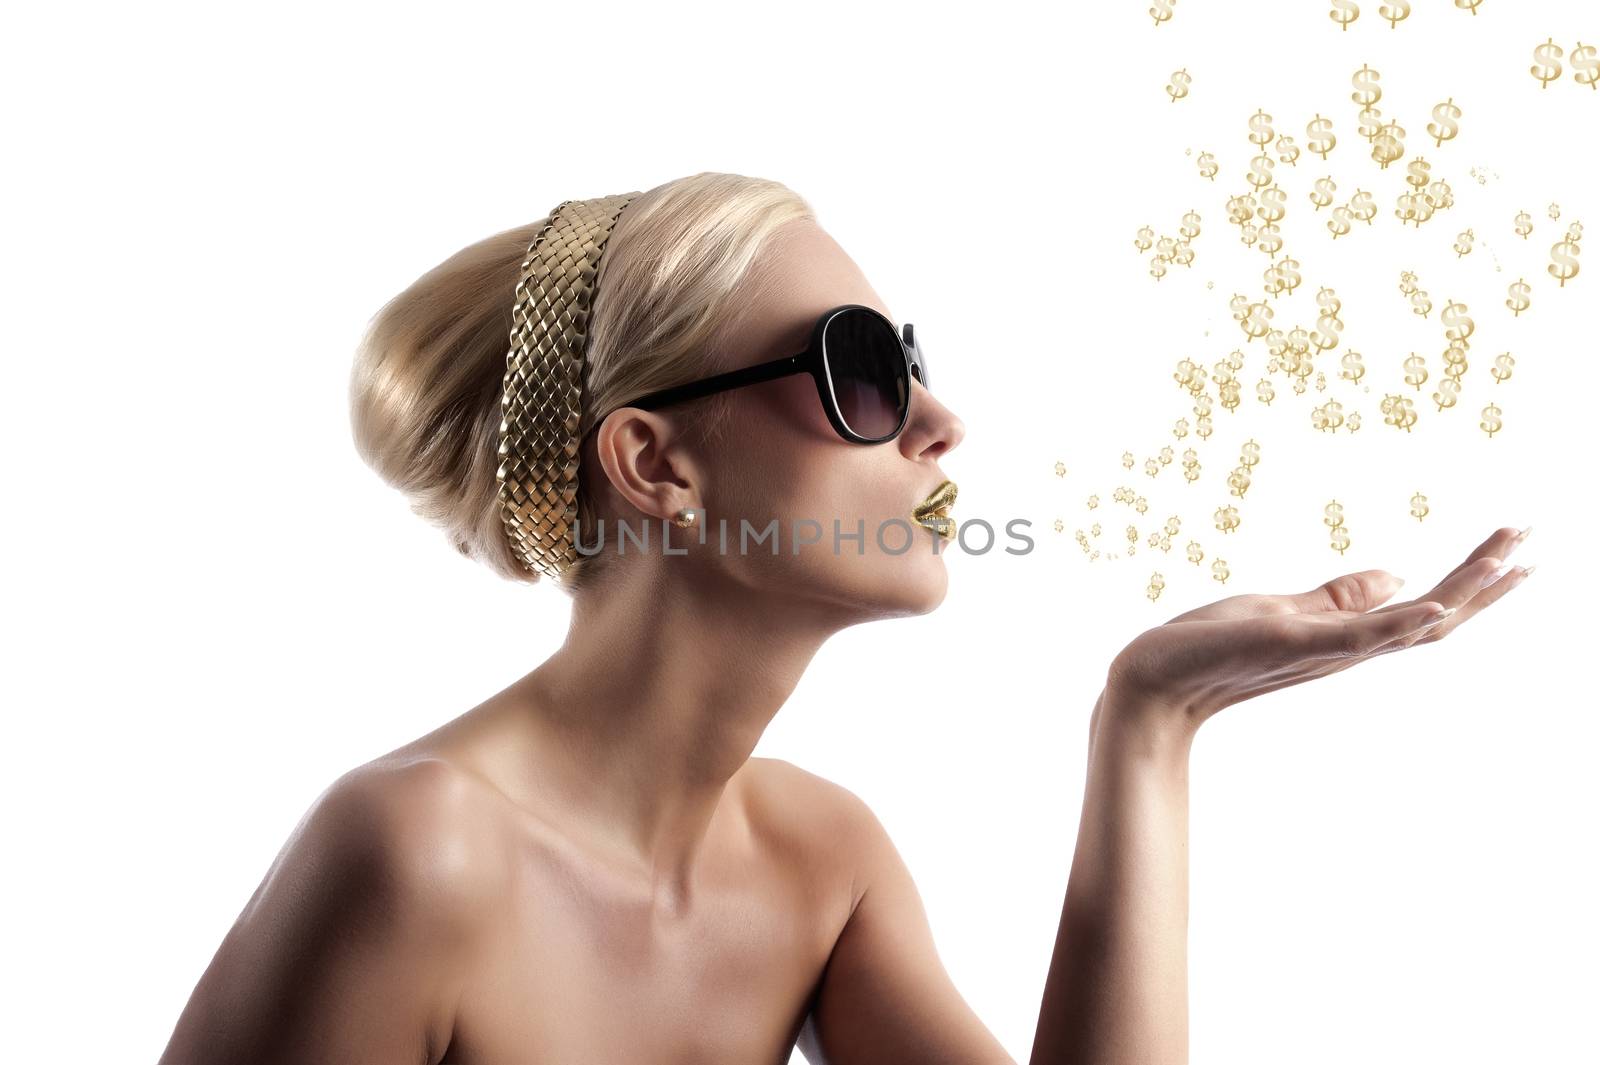 blond young woman in beauty shot looking on one side and blowing some golden star from her hand